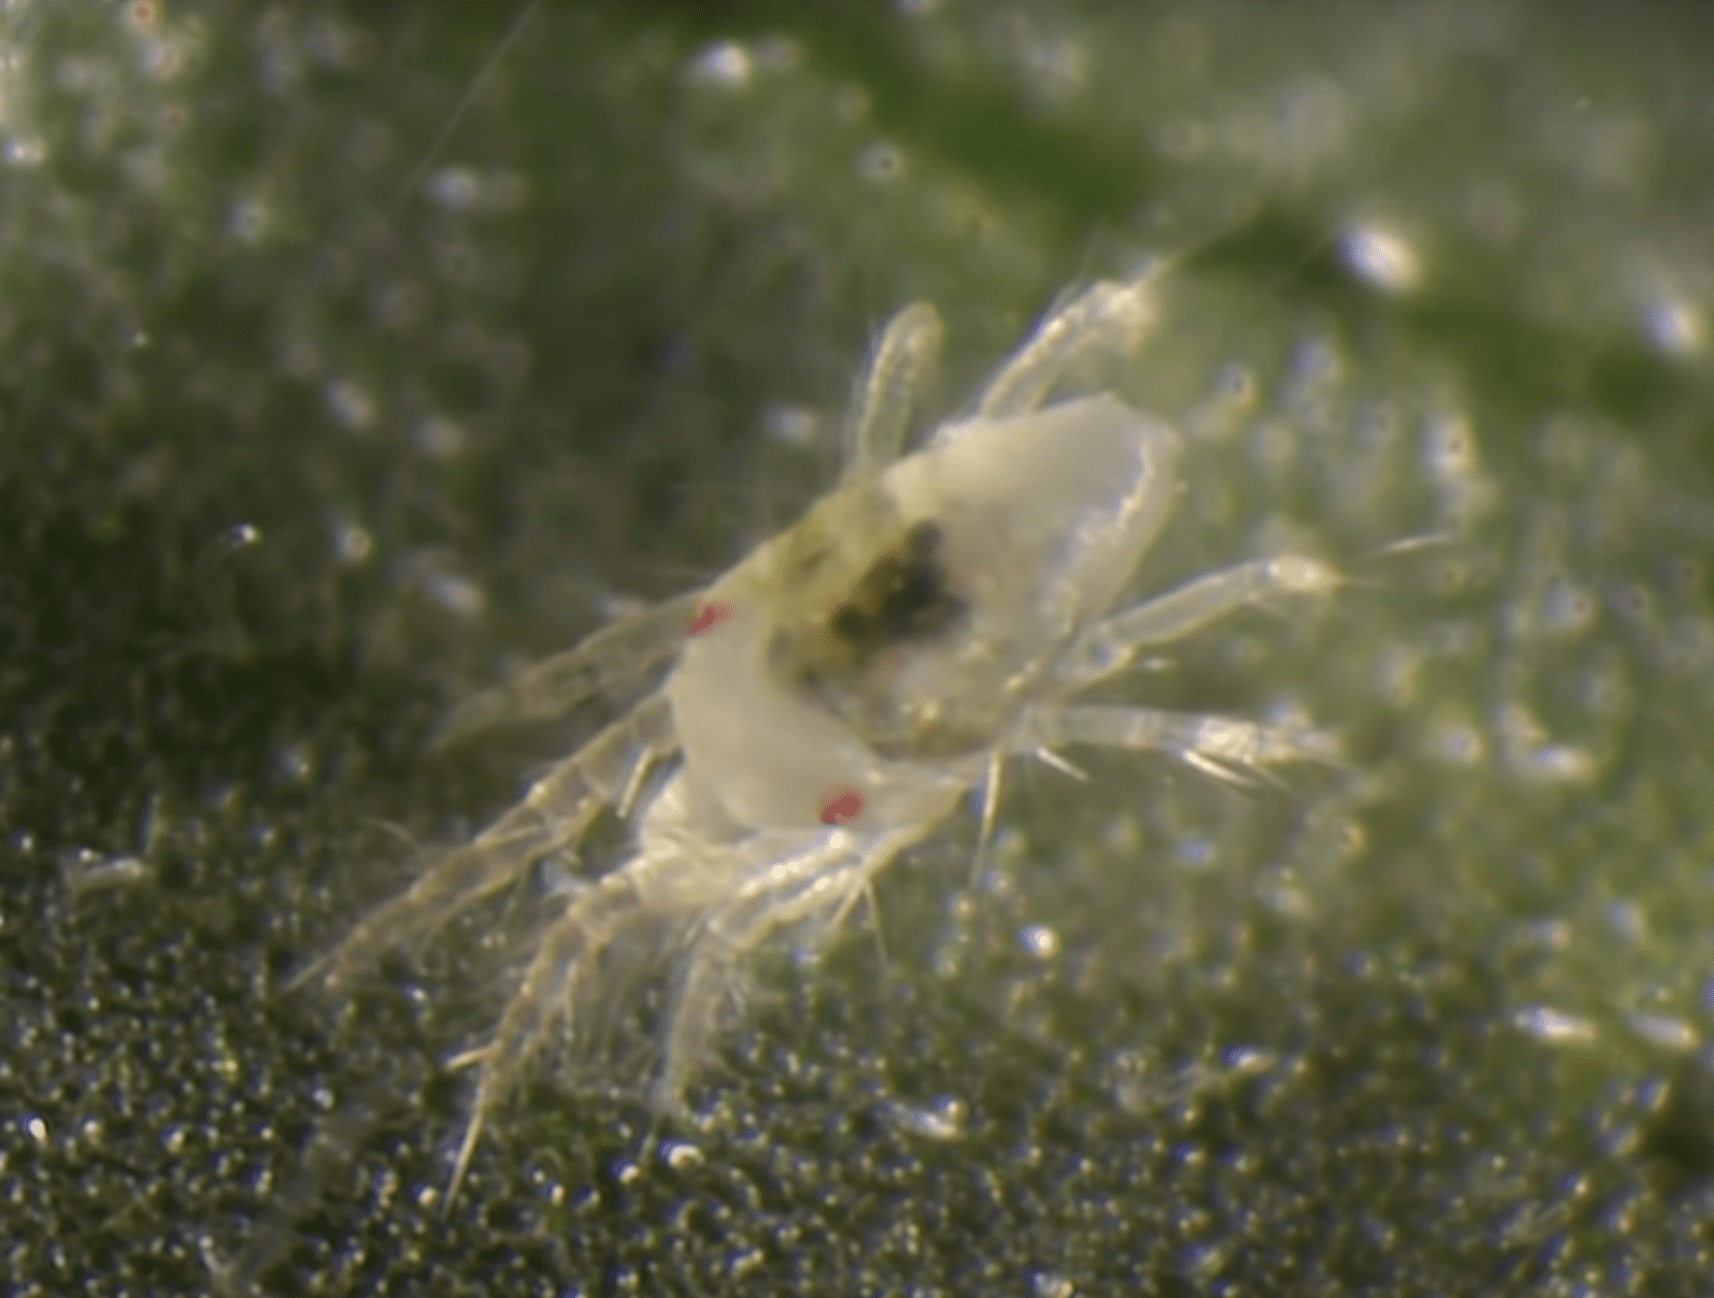 Close up view of a spider mite.